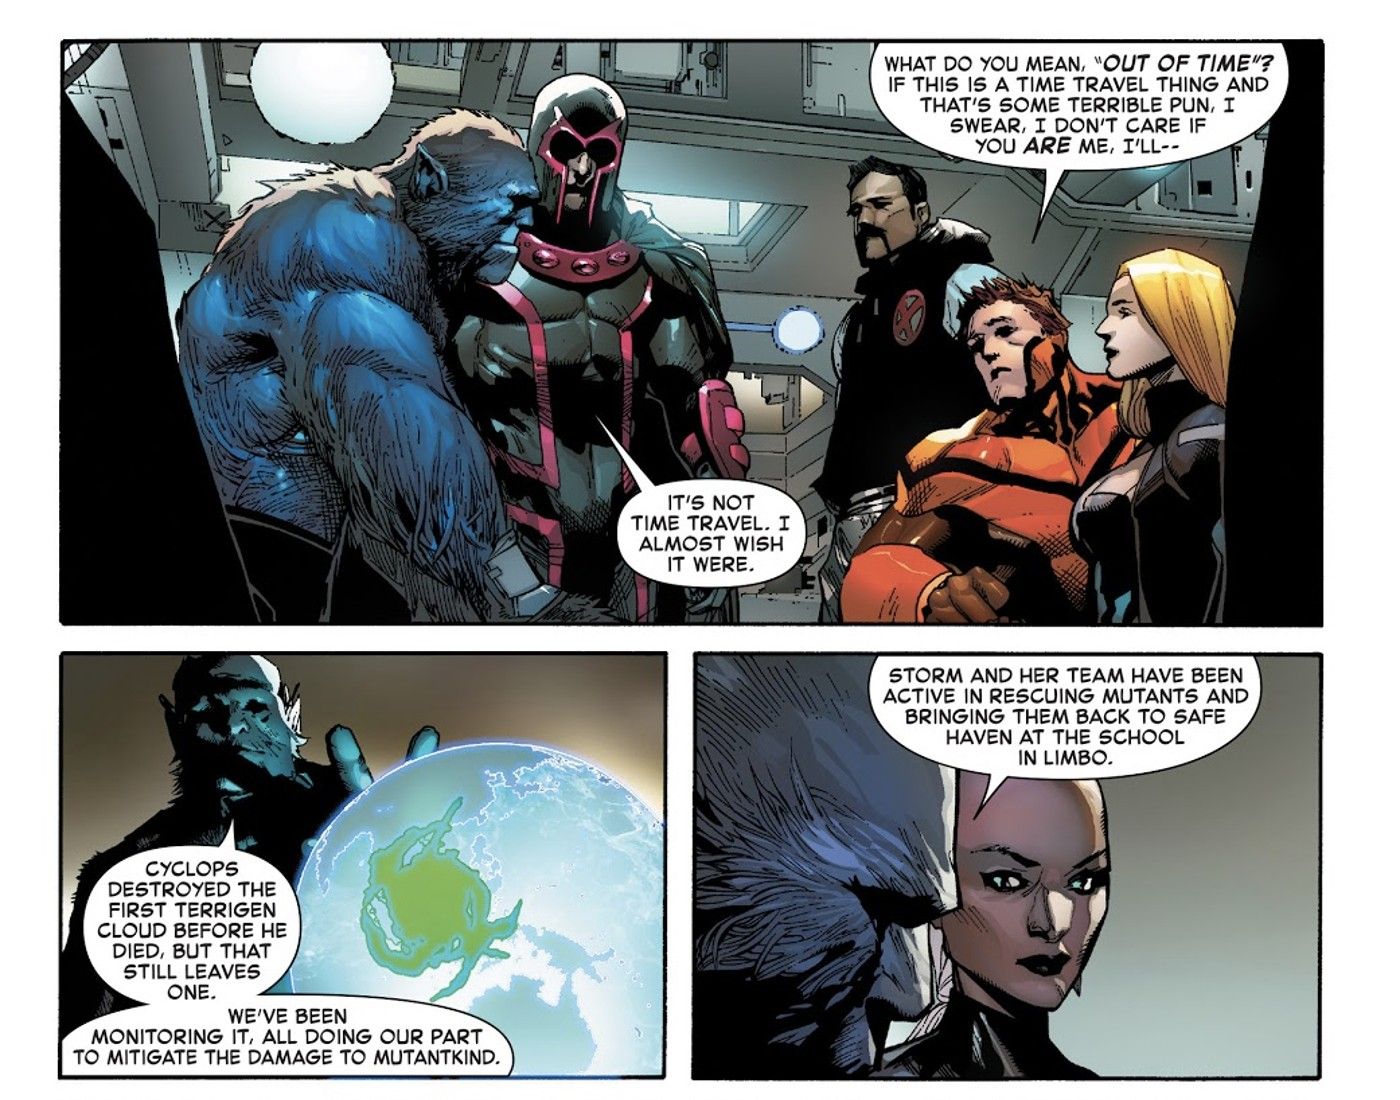 X-Men vs Inhumans War Only Happened Because of One Stupid Decision